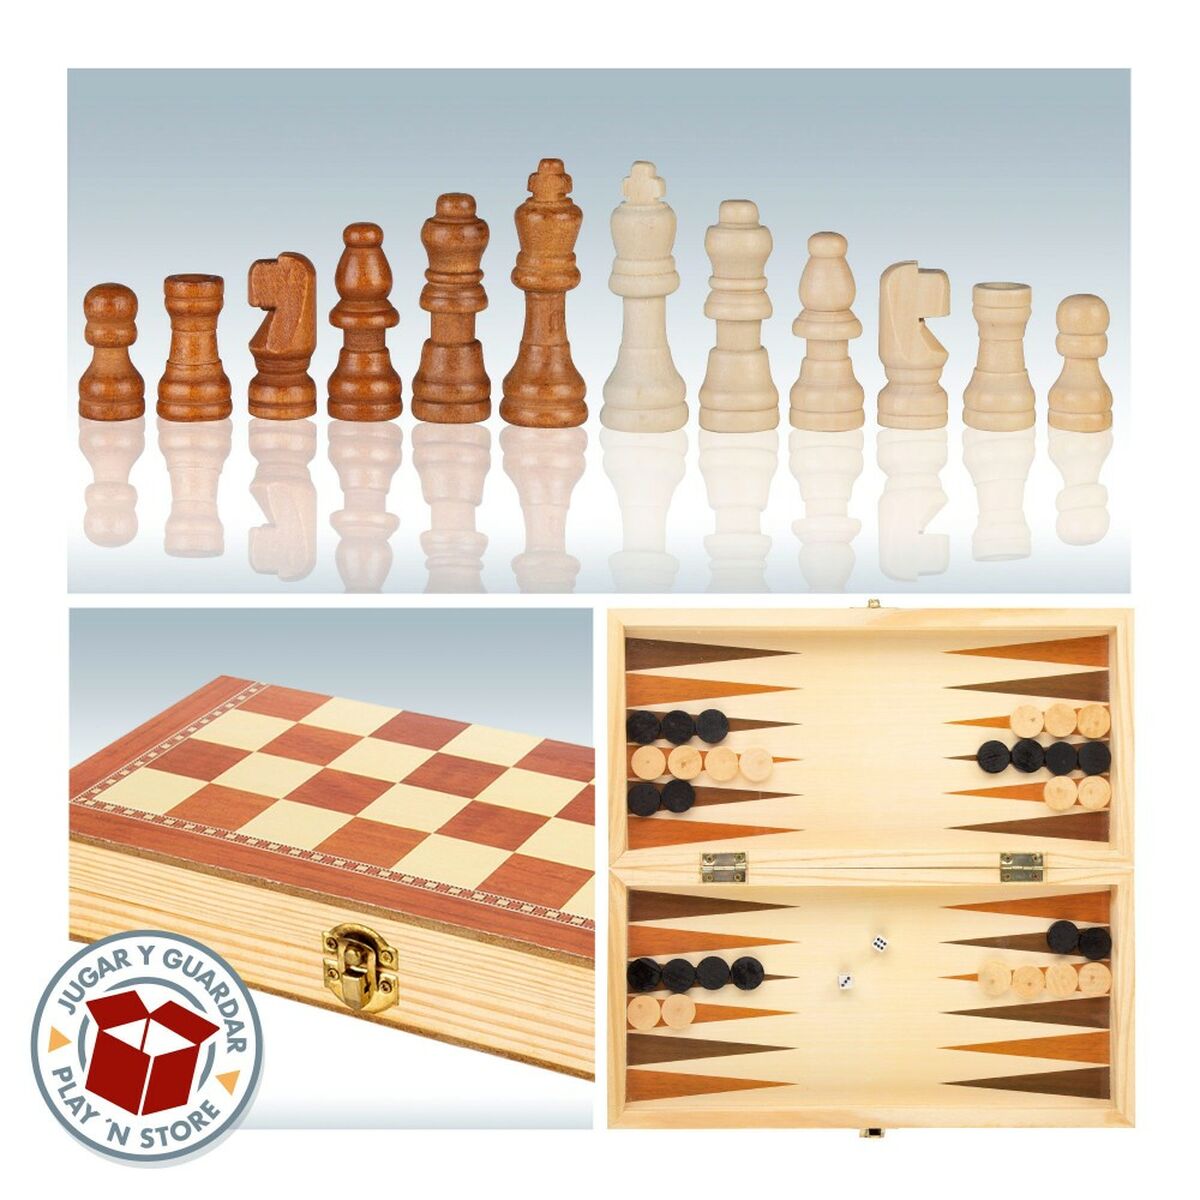 Chess and Checkers Board Colorbaby Backgammon Wood (6 Units) - Little Baby Shop